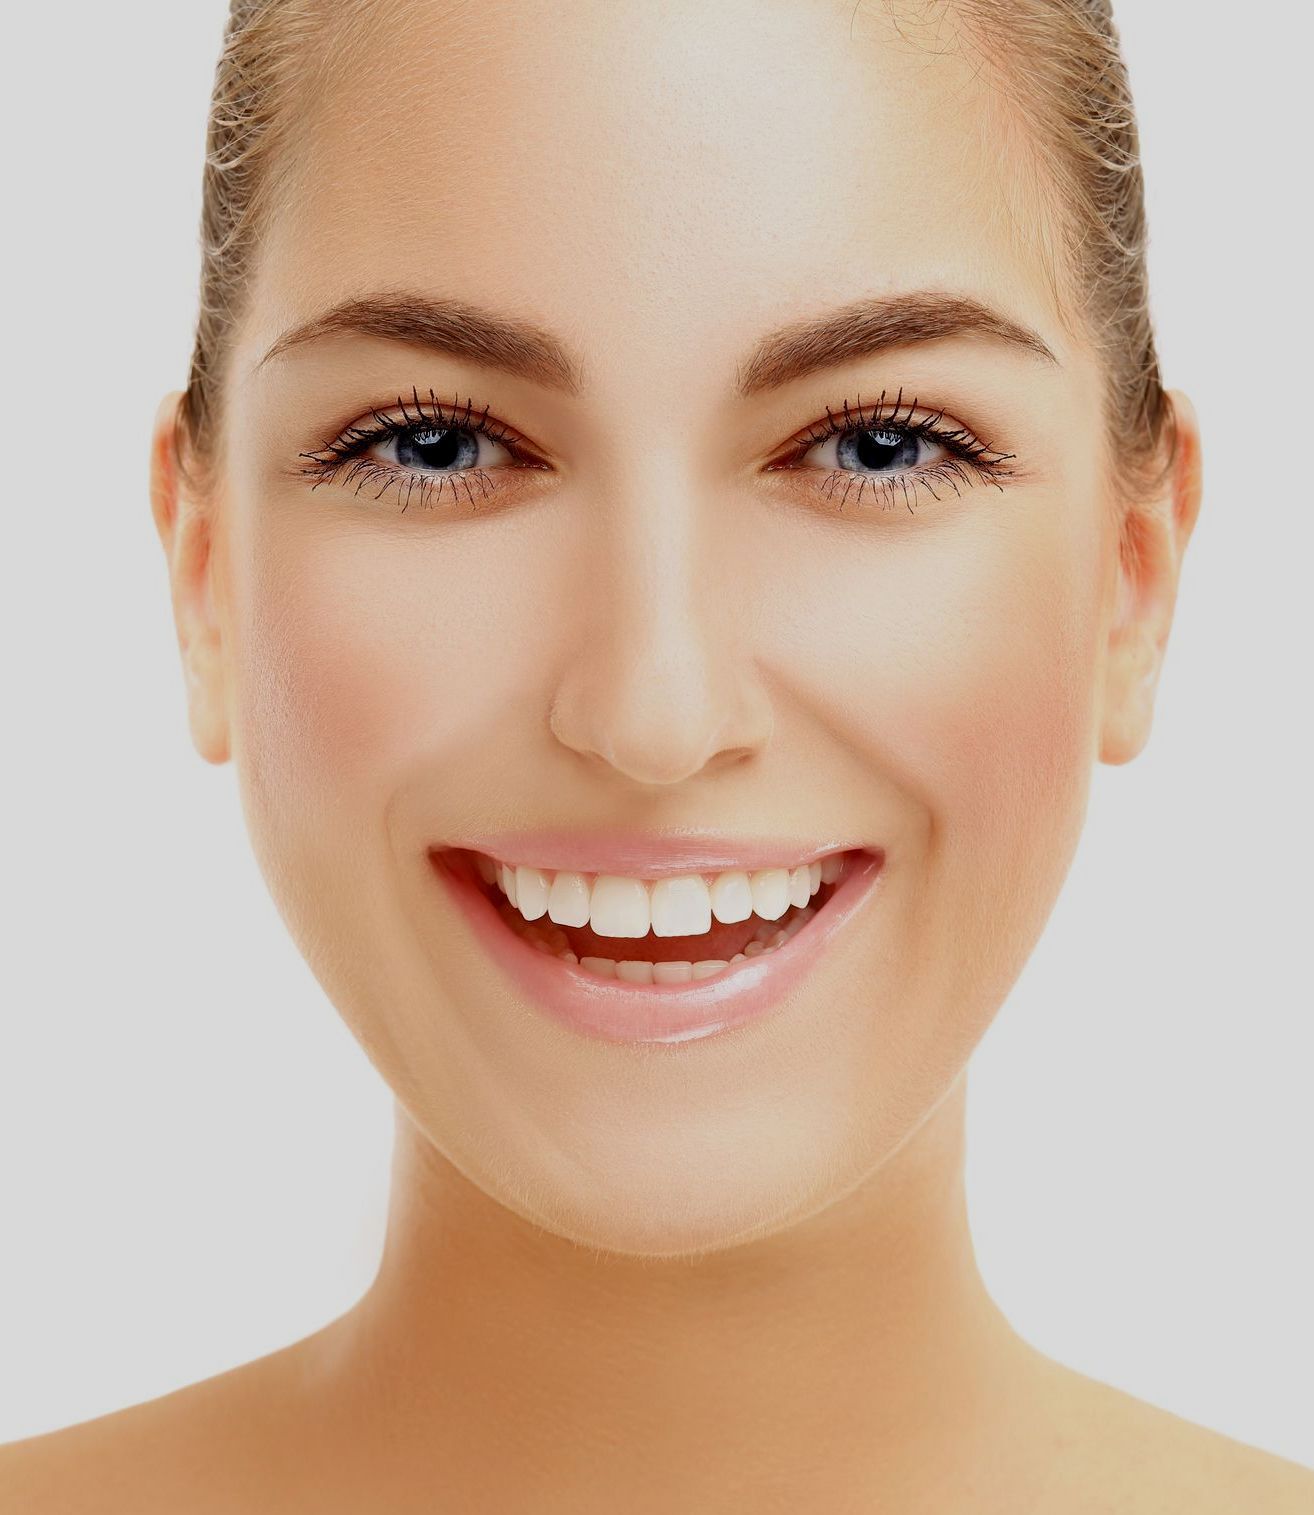 A close up of a woman 's face smiling on a white background